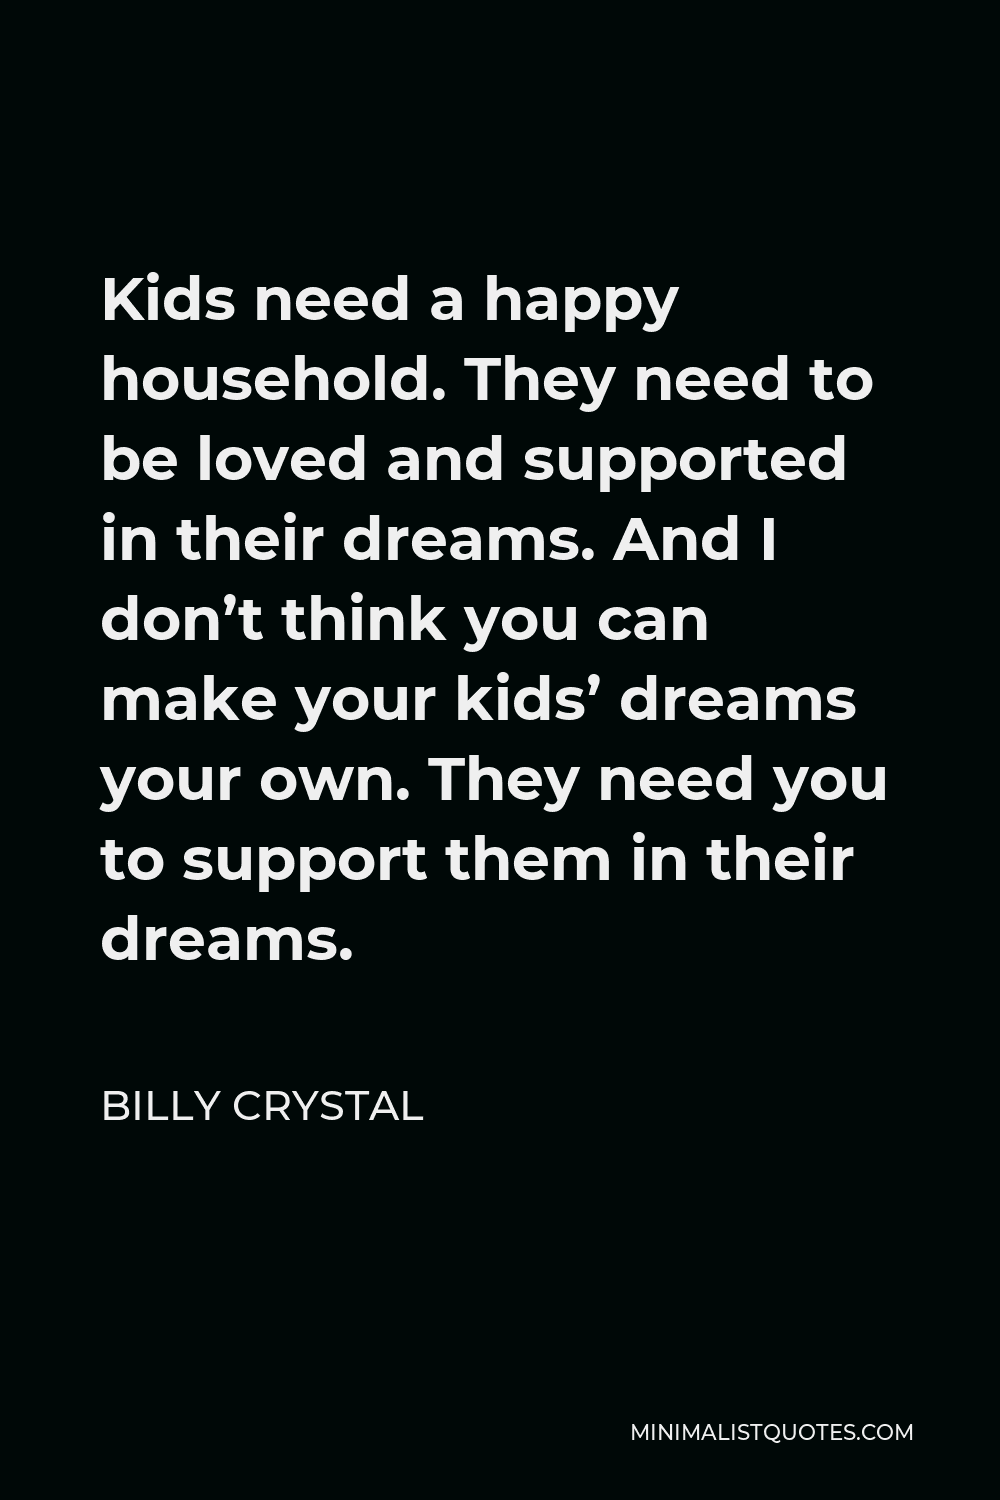 Billy Crystal Quote - Kids need a happy household. They need to be loved and supported in their dreams. And I don’t think you can make your kids’ dreams your own. They need you to support them in their dreams.